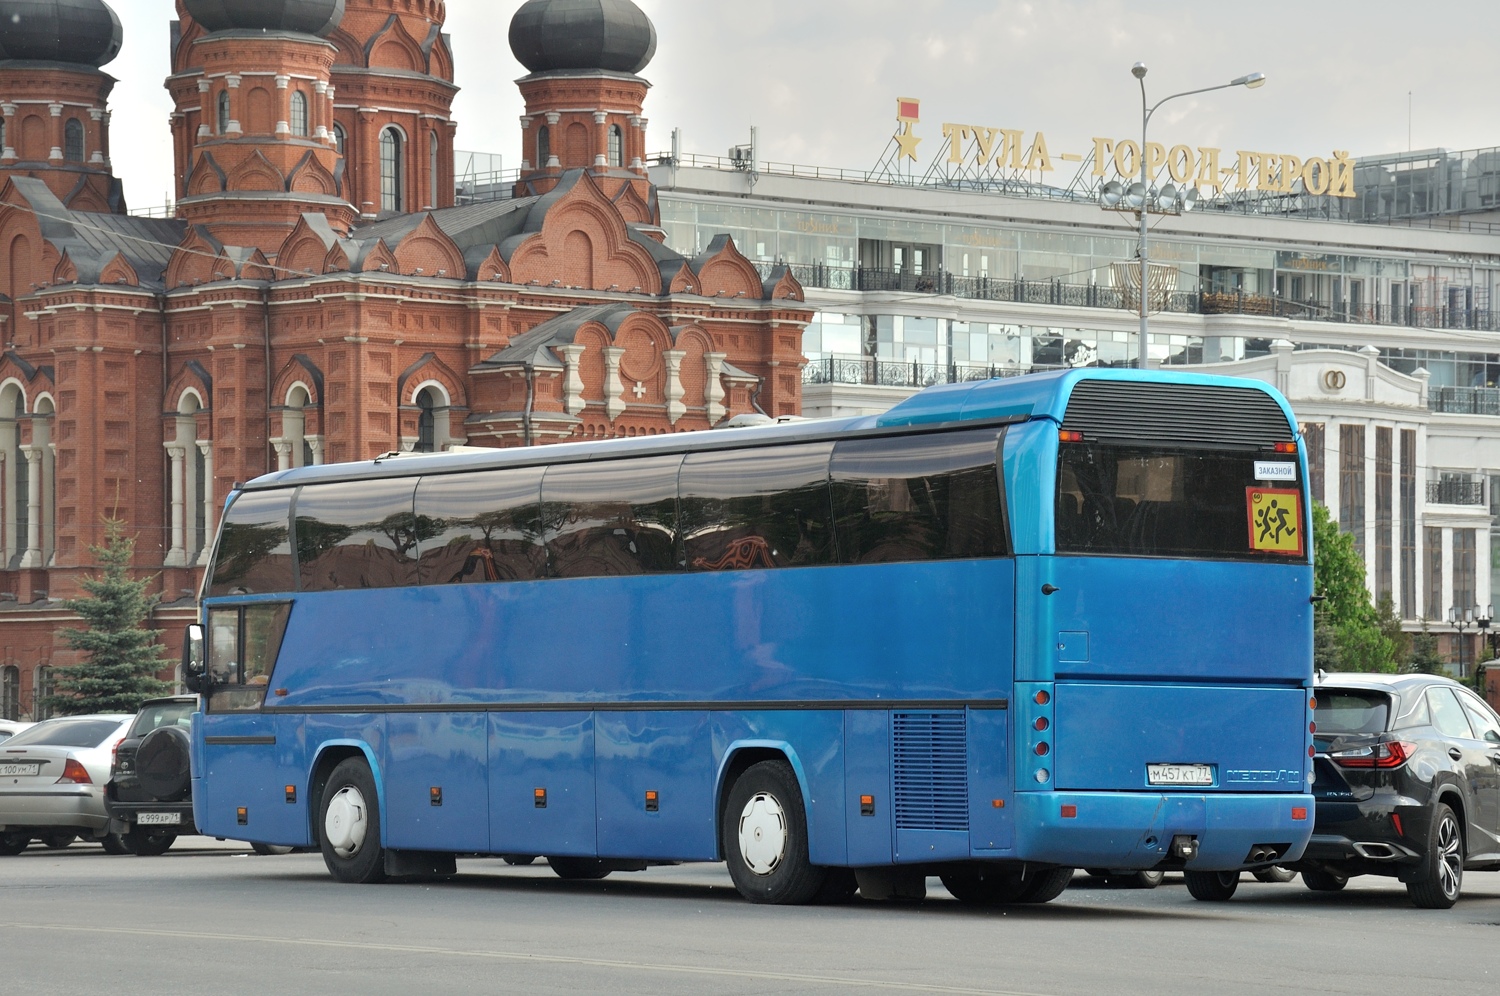 Moscow, Neoplan N116 Cityliner No. М 457 КТ 77